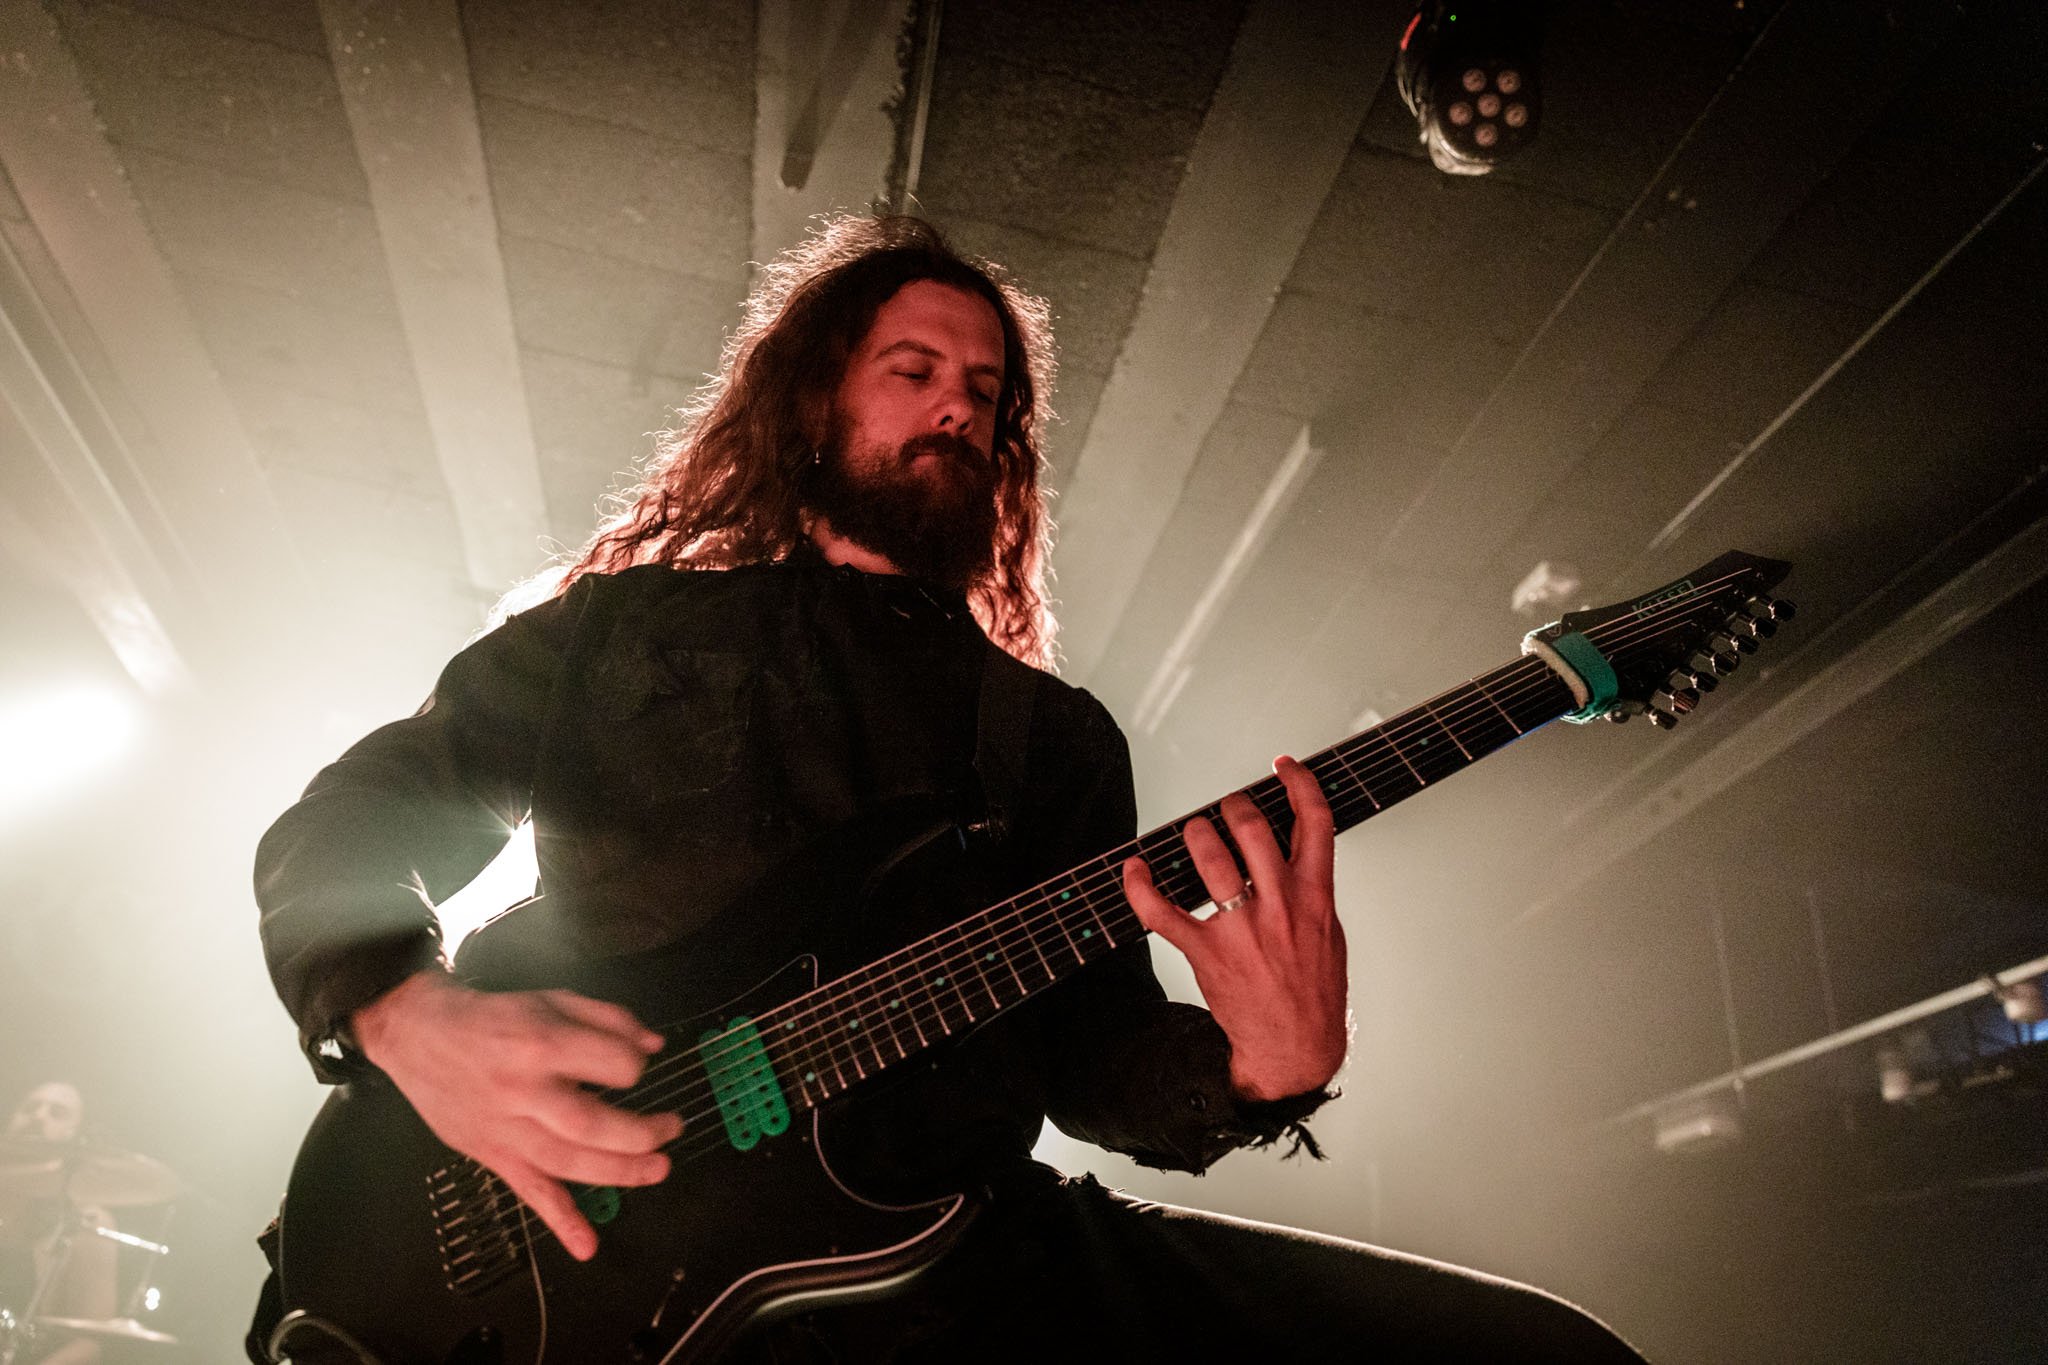 Rivers of Nihil at the Rebellion in Manchester on November 29th 